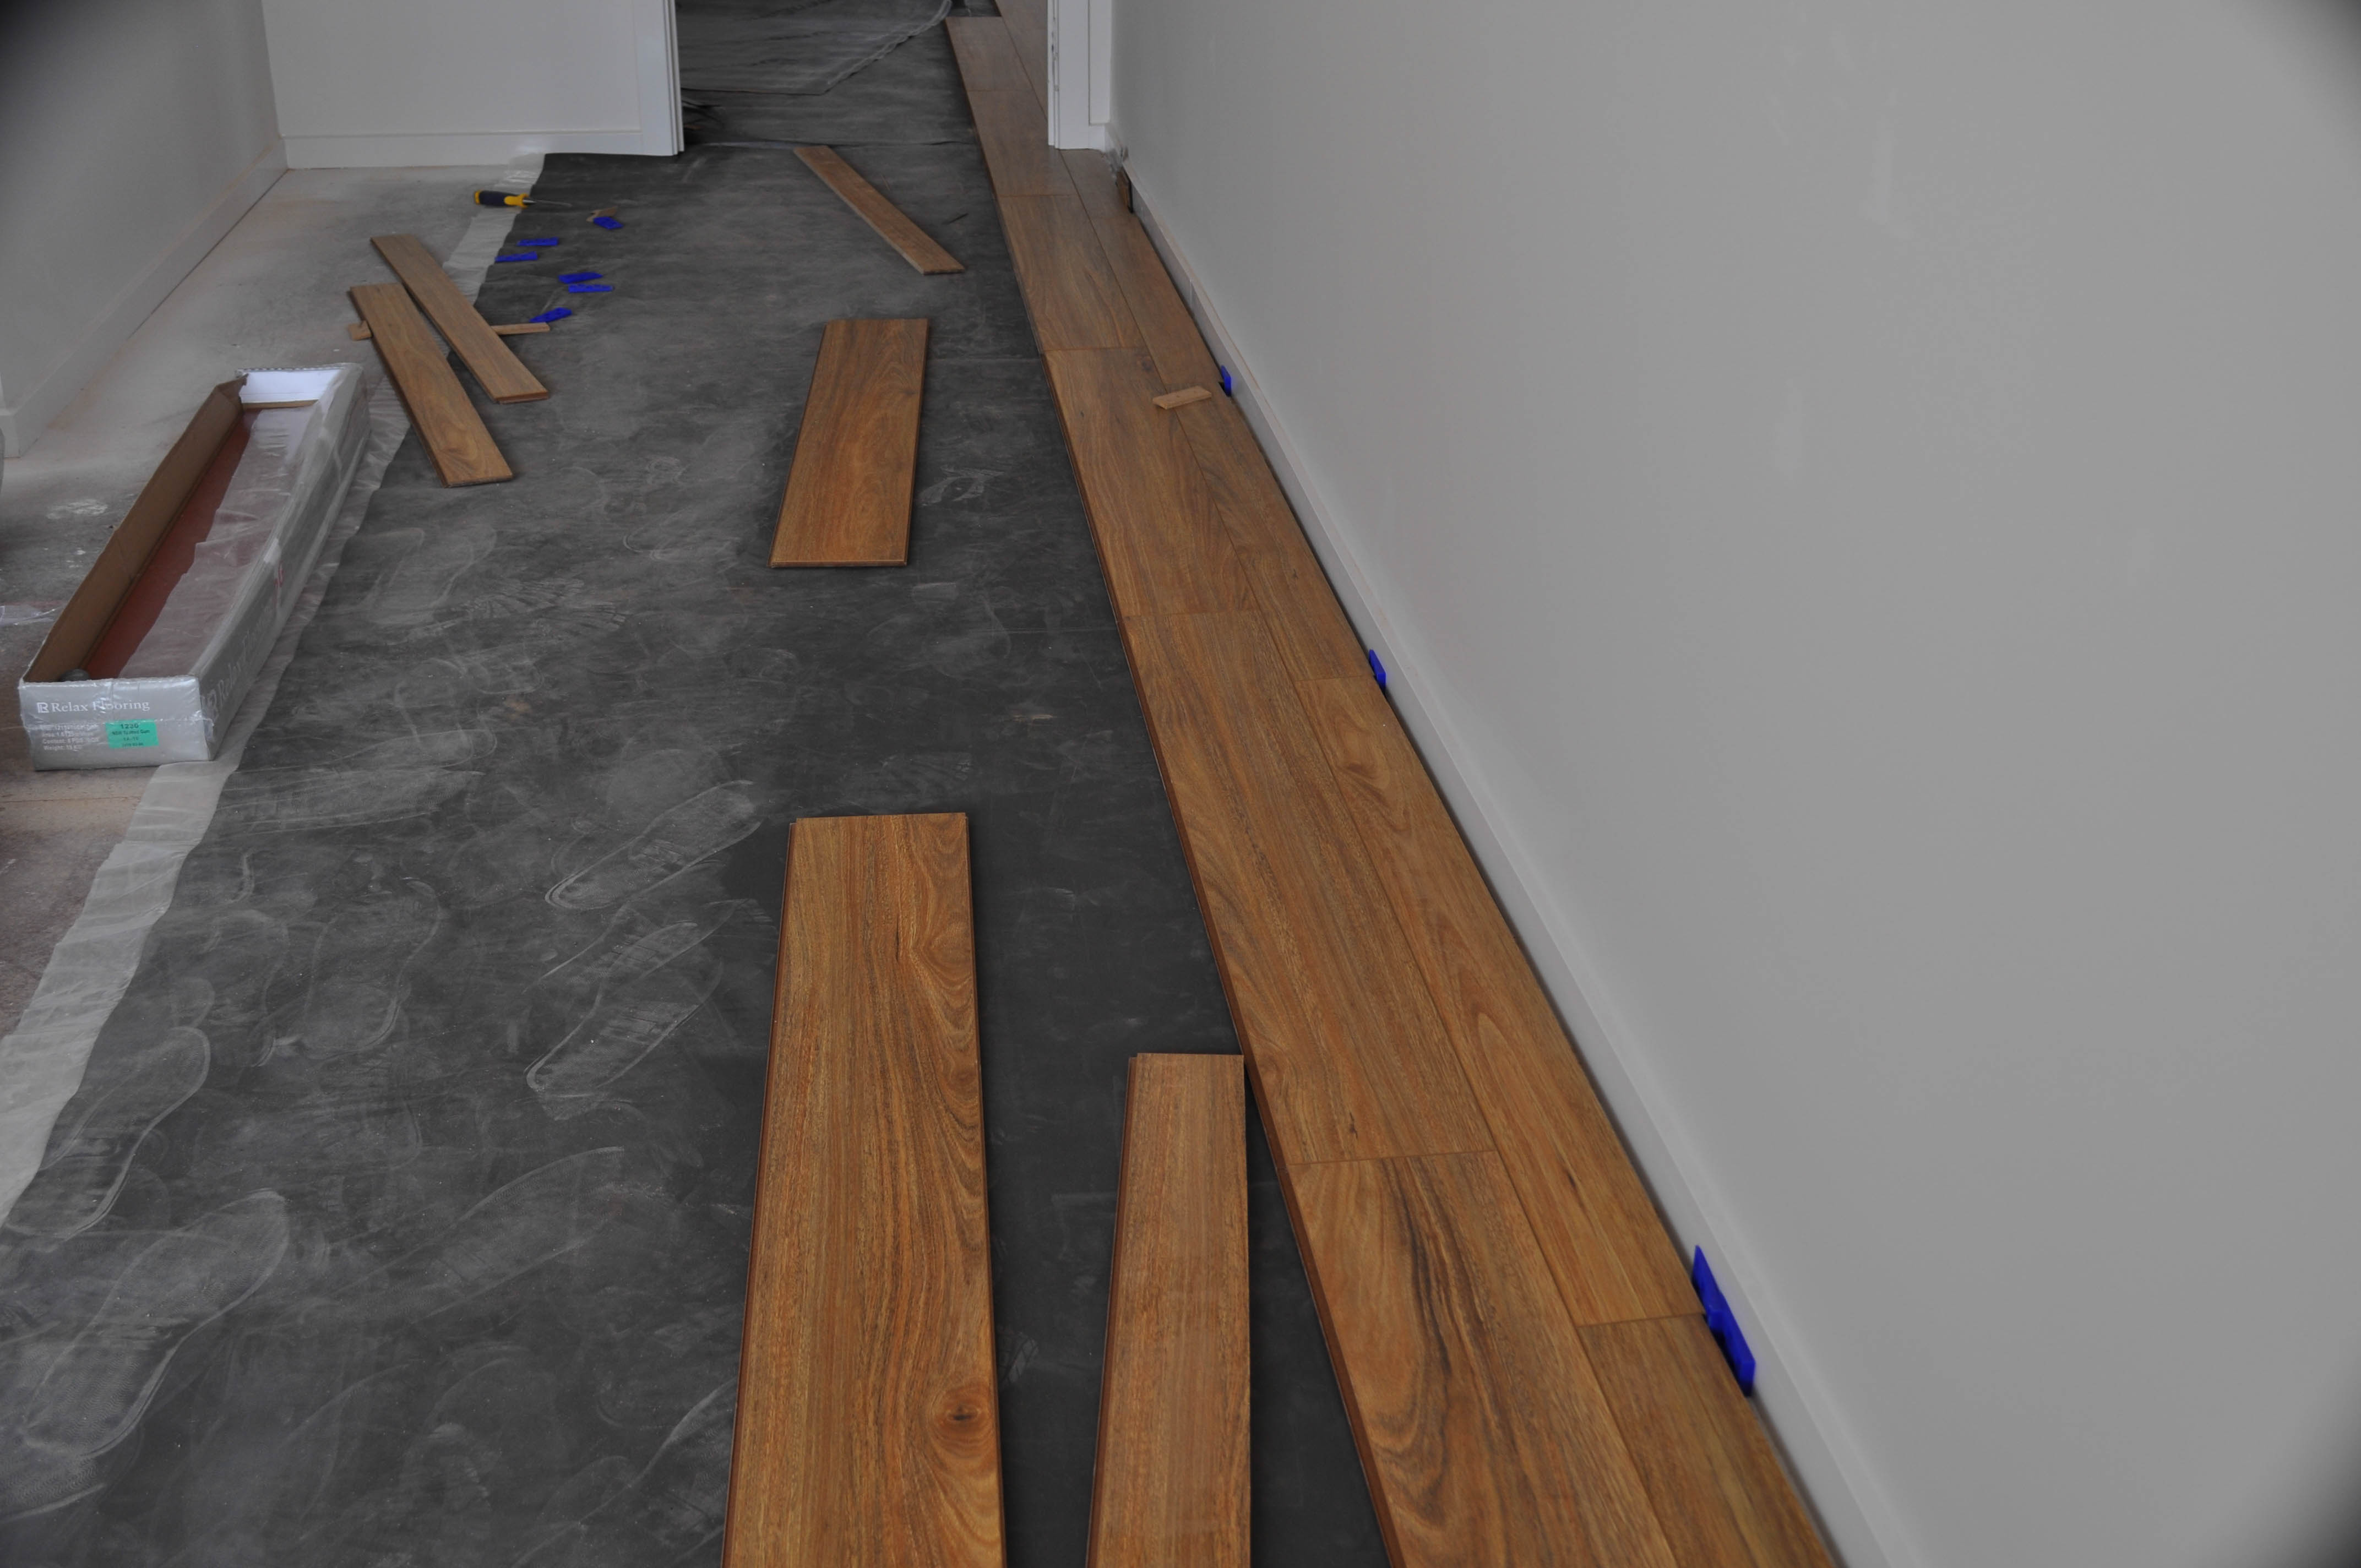 showing the first stage of the commencement of laying a laminate floor. The first row of laminate flooring is being laid on top 
of laid out underlay. It shows the ease with which the underlay is laid and the ease with which the laminate boards are placed into position and affixed to each other. 
Because of the ease of placing the boards together the picture also shows the quick speed with which a floor can be laid which reduces the cost of laying or installation.
So in an indirect way the picture shows the competitiveness of laminate flooring with the traditional hard flooring materials. The boards are 12mm thick spotted gum laminate
 flooring being installed in a room by Concord Floors in a home in the suburb of Werribee Vic 3340.